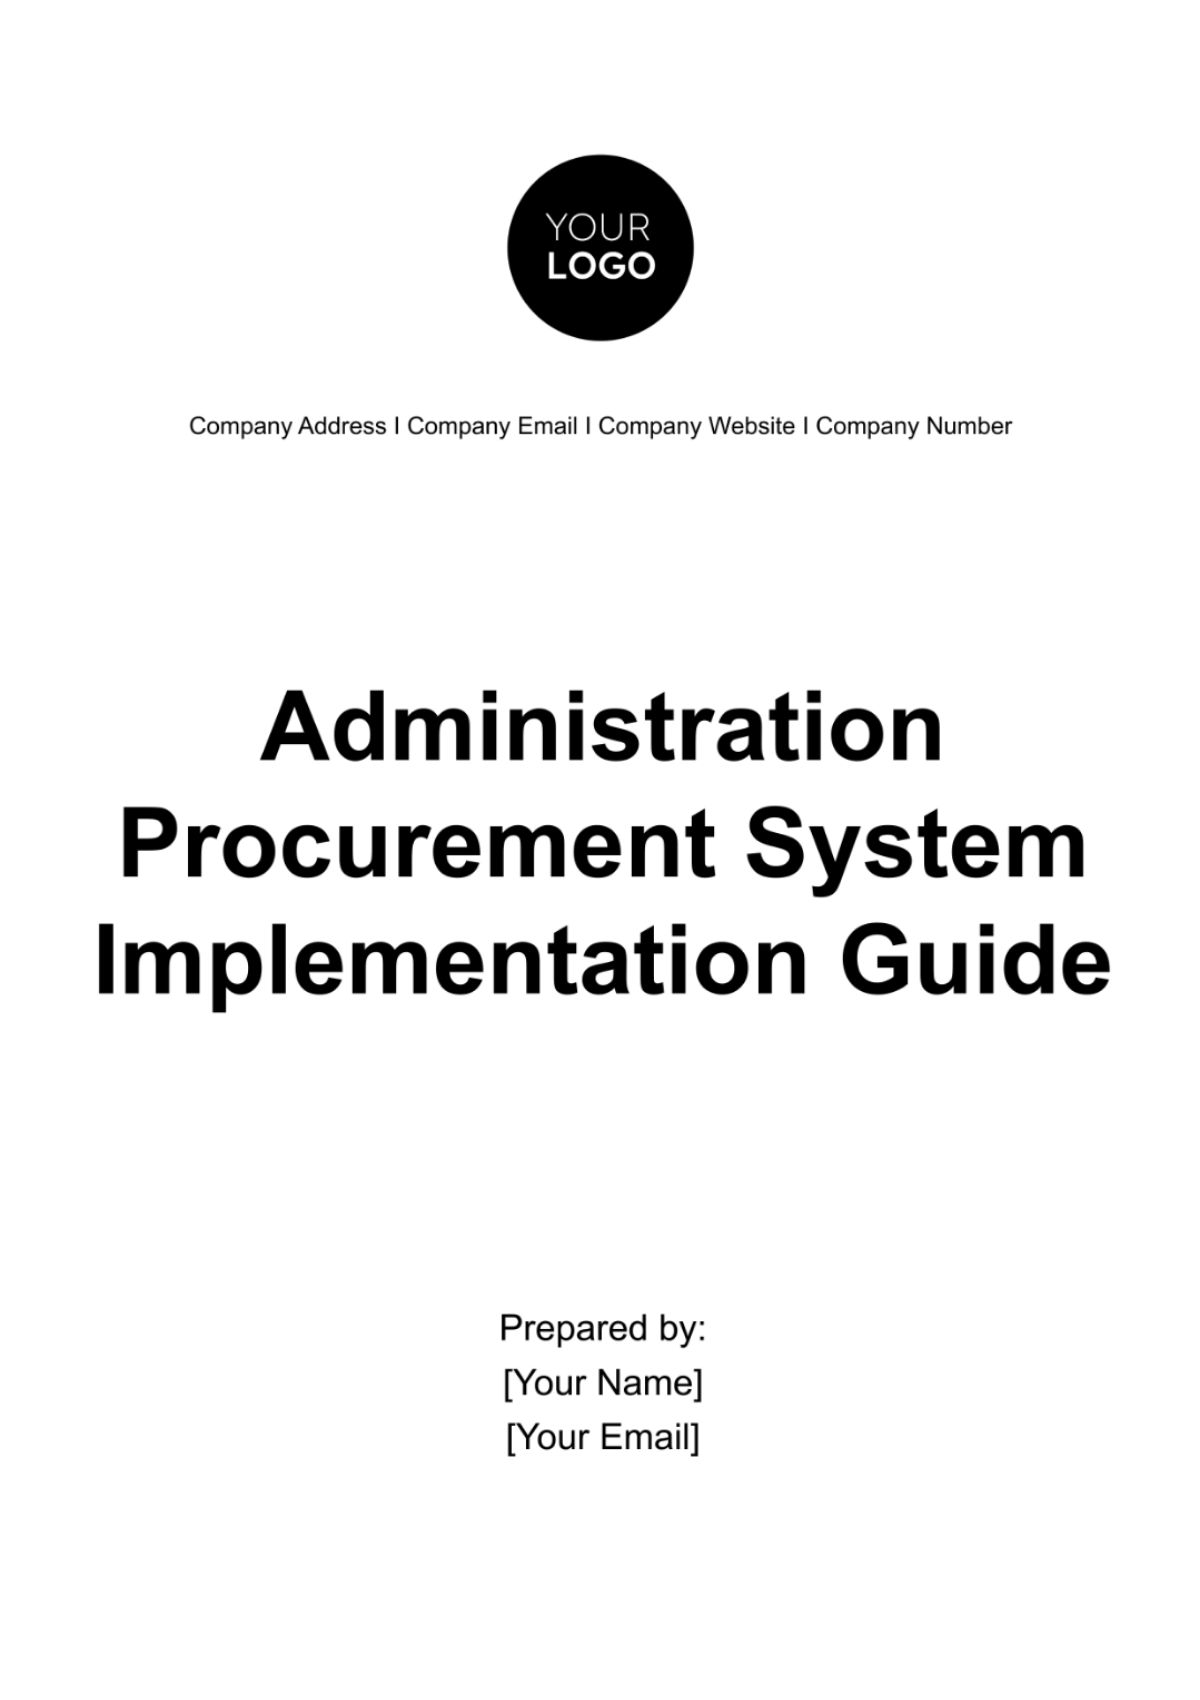 Free Administration Procurement System Implementation Guide Template